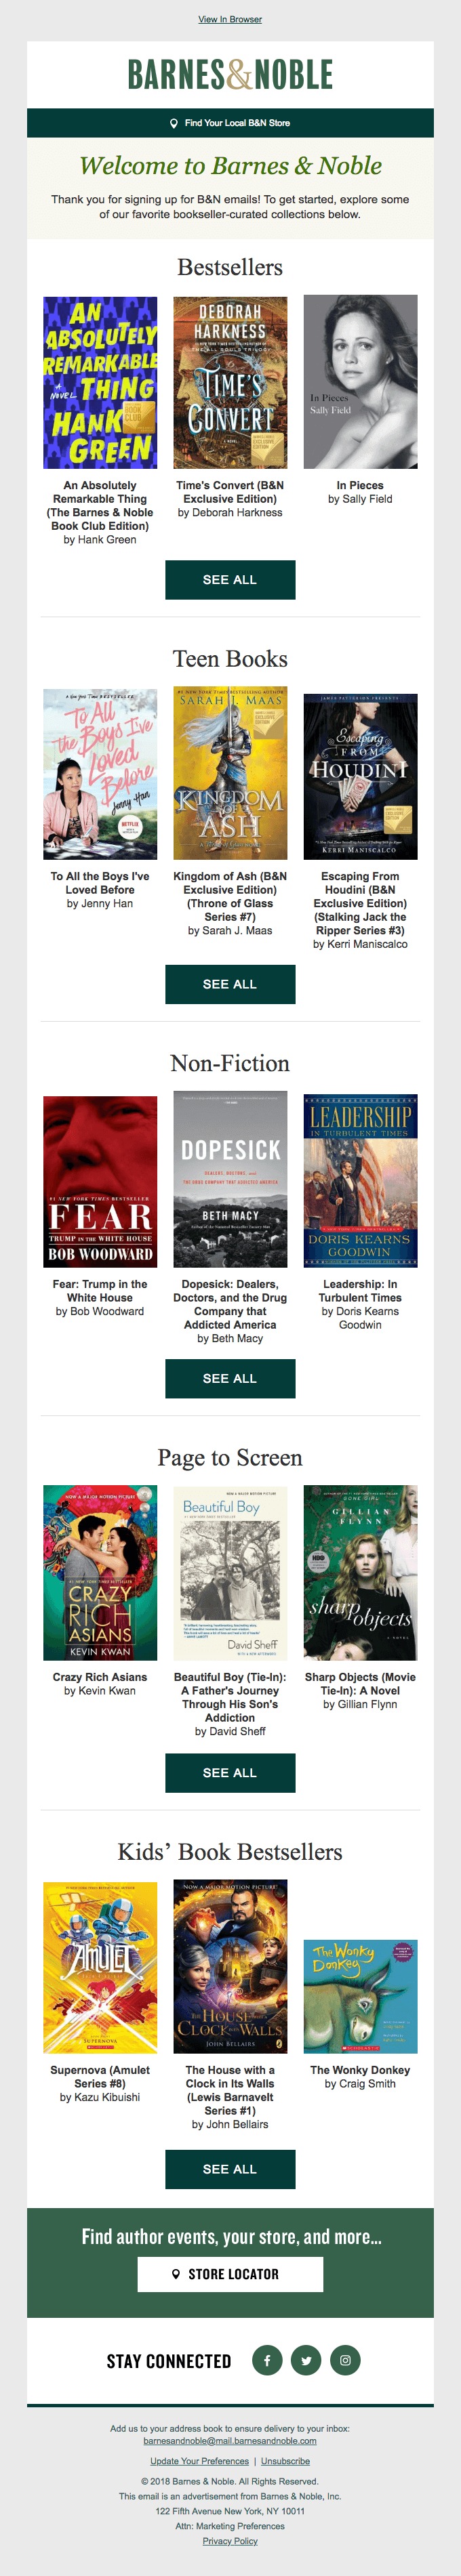 This email from Barnes & Noble helps them build their stellar reputation.